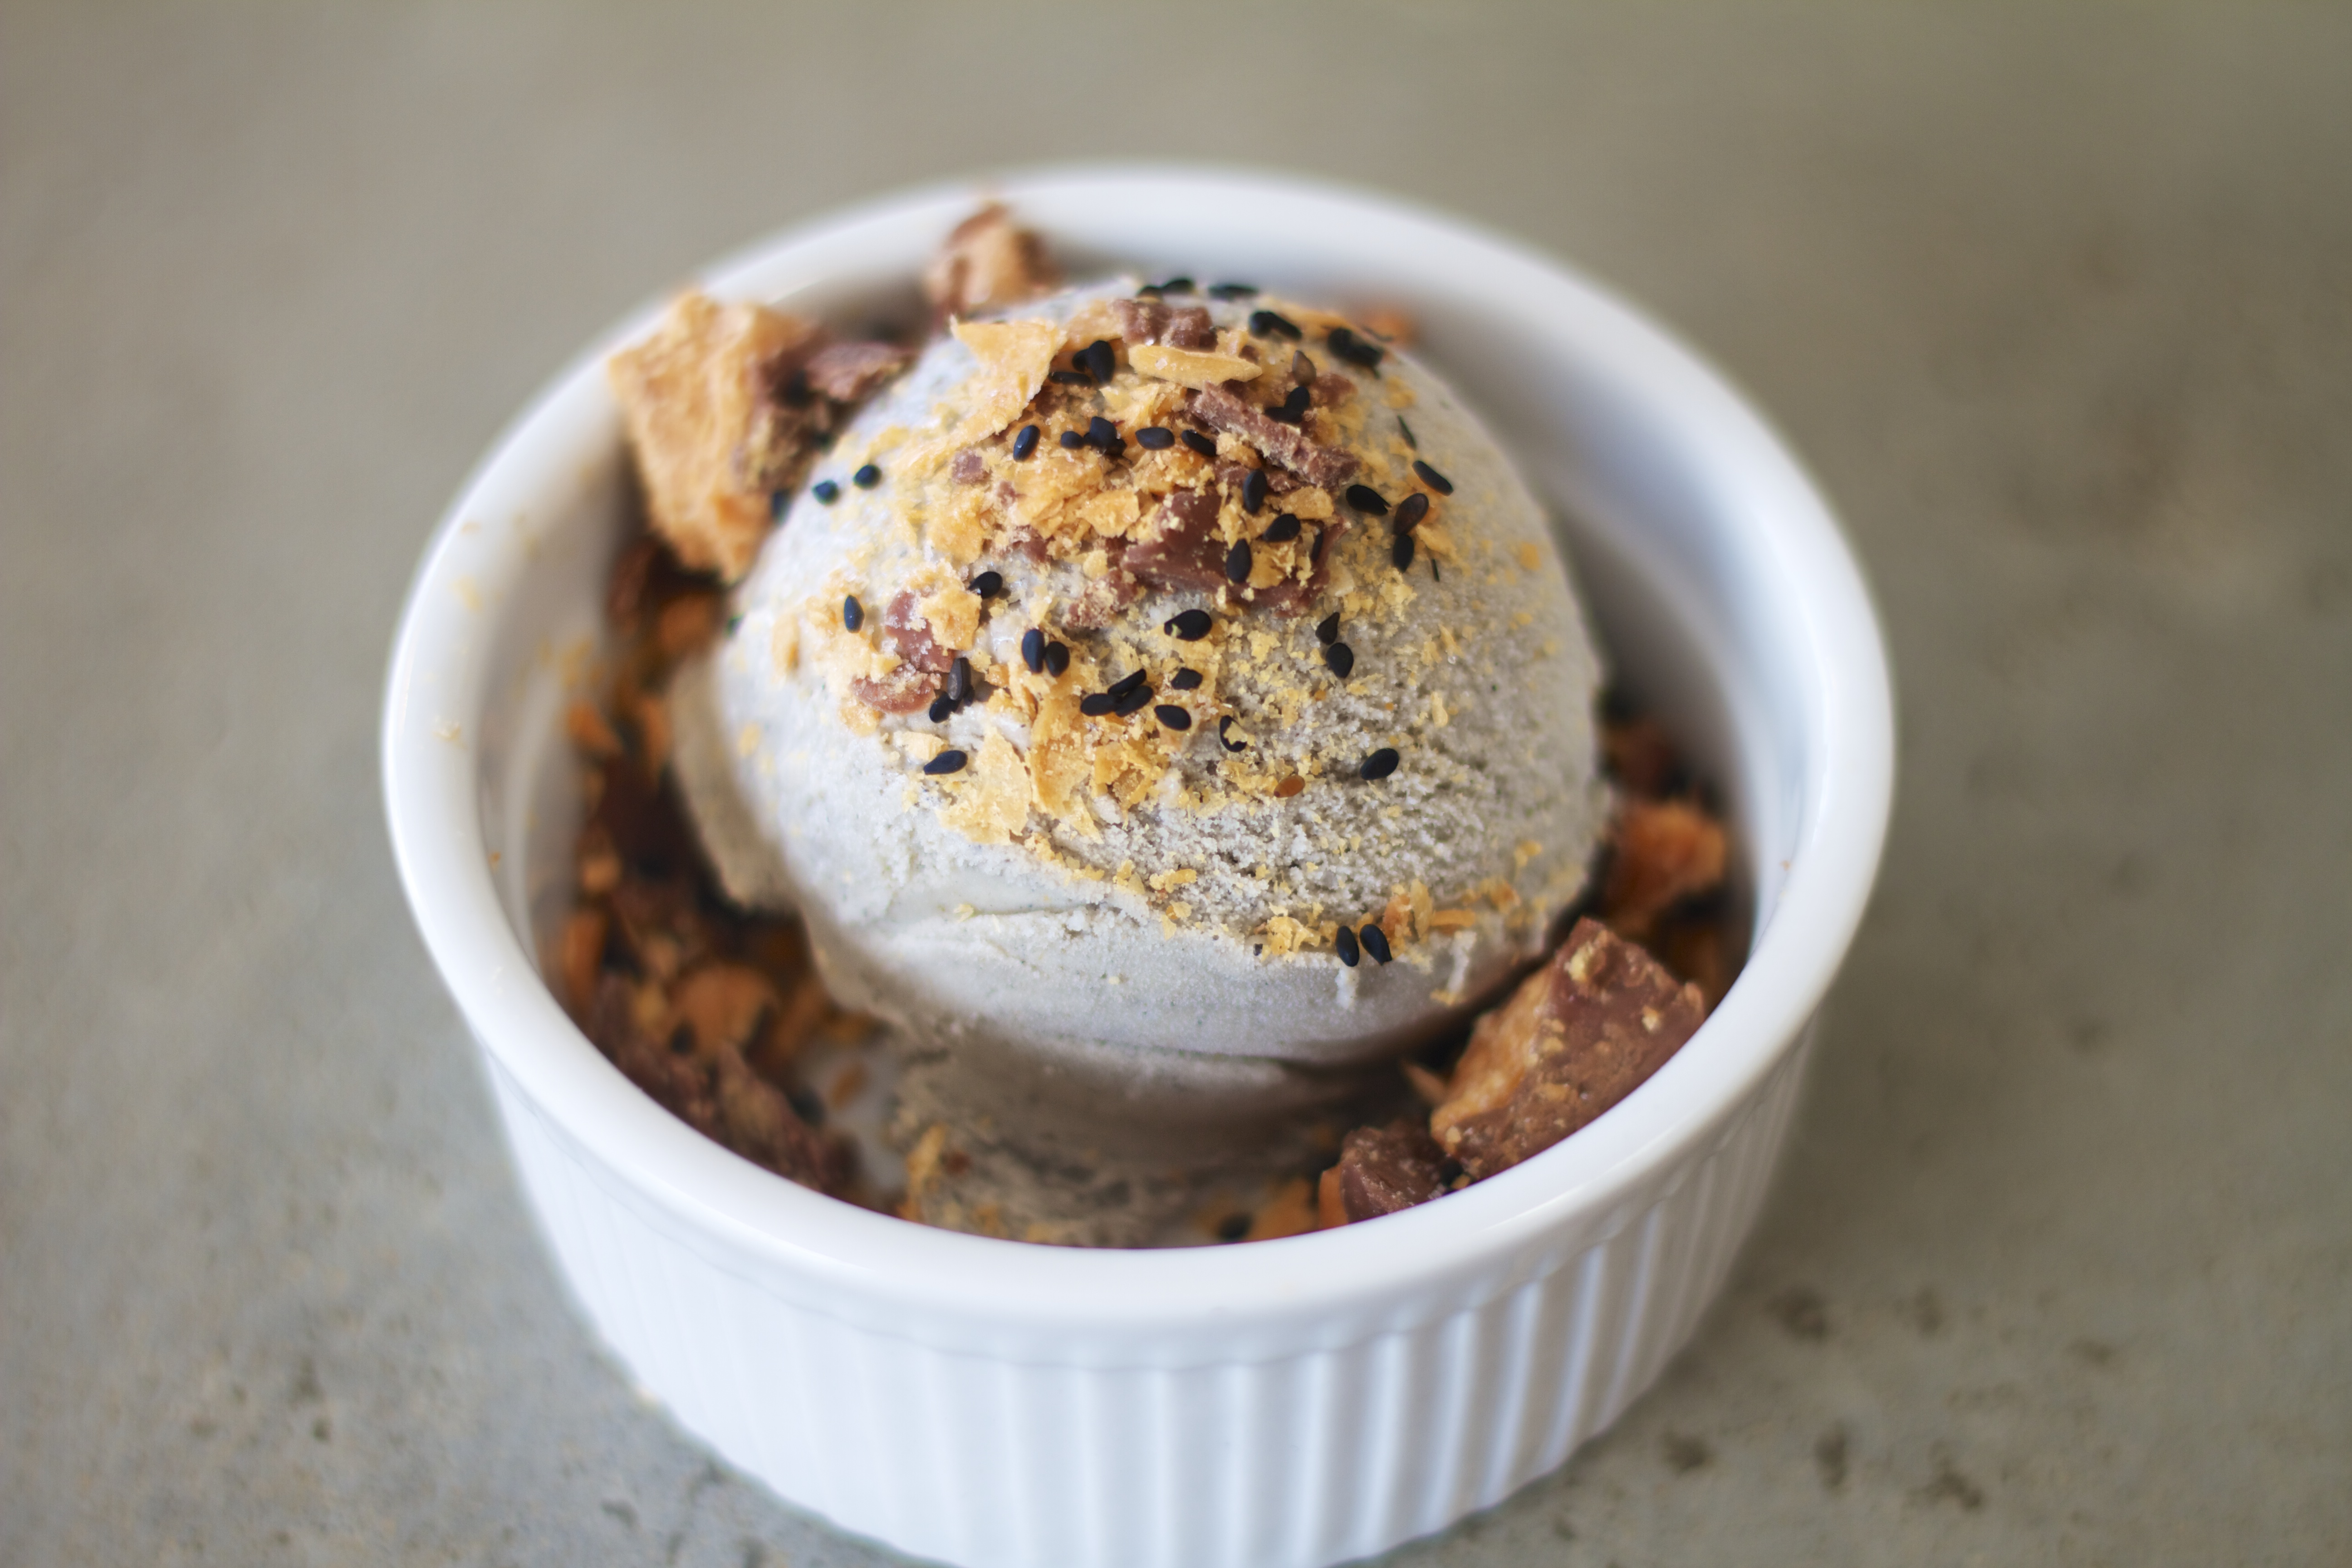 Dolcezza's Butterfinger coppetta is available during October at Union Market and 14th Street NW. (Photo: Dolcezza)